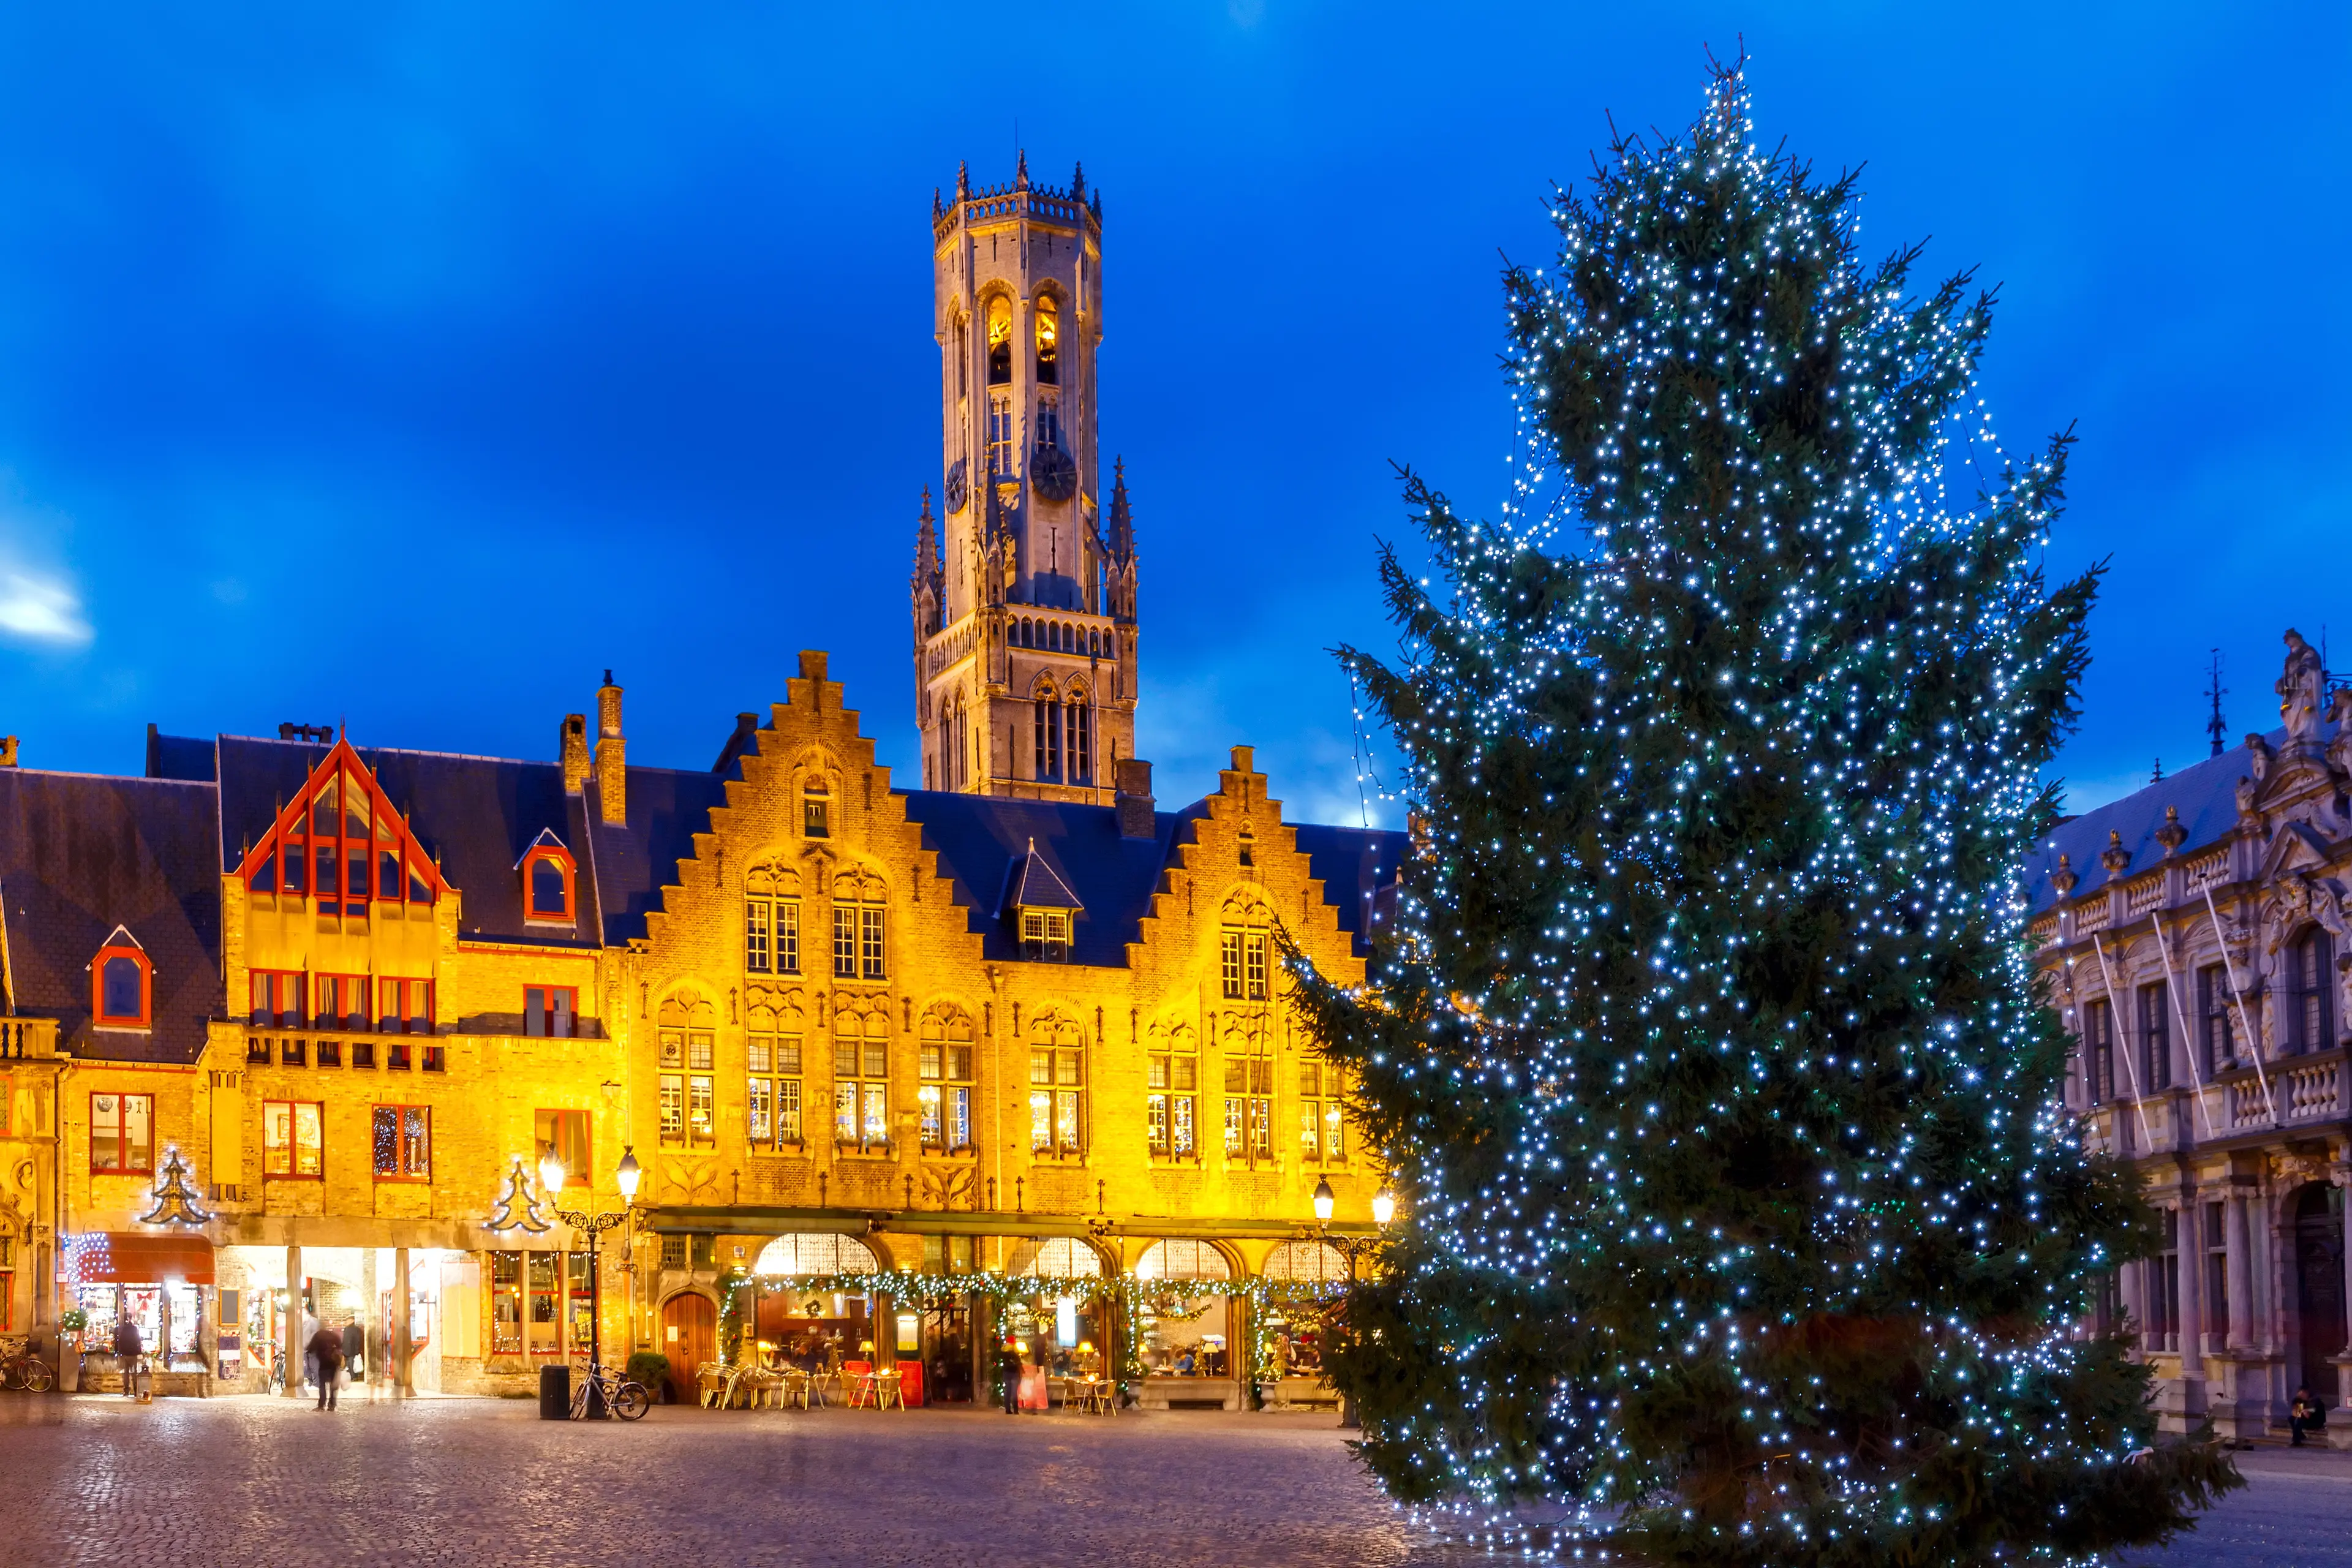 3-Day Festive Christmas Getaway for Couples in Bruges, Belgium